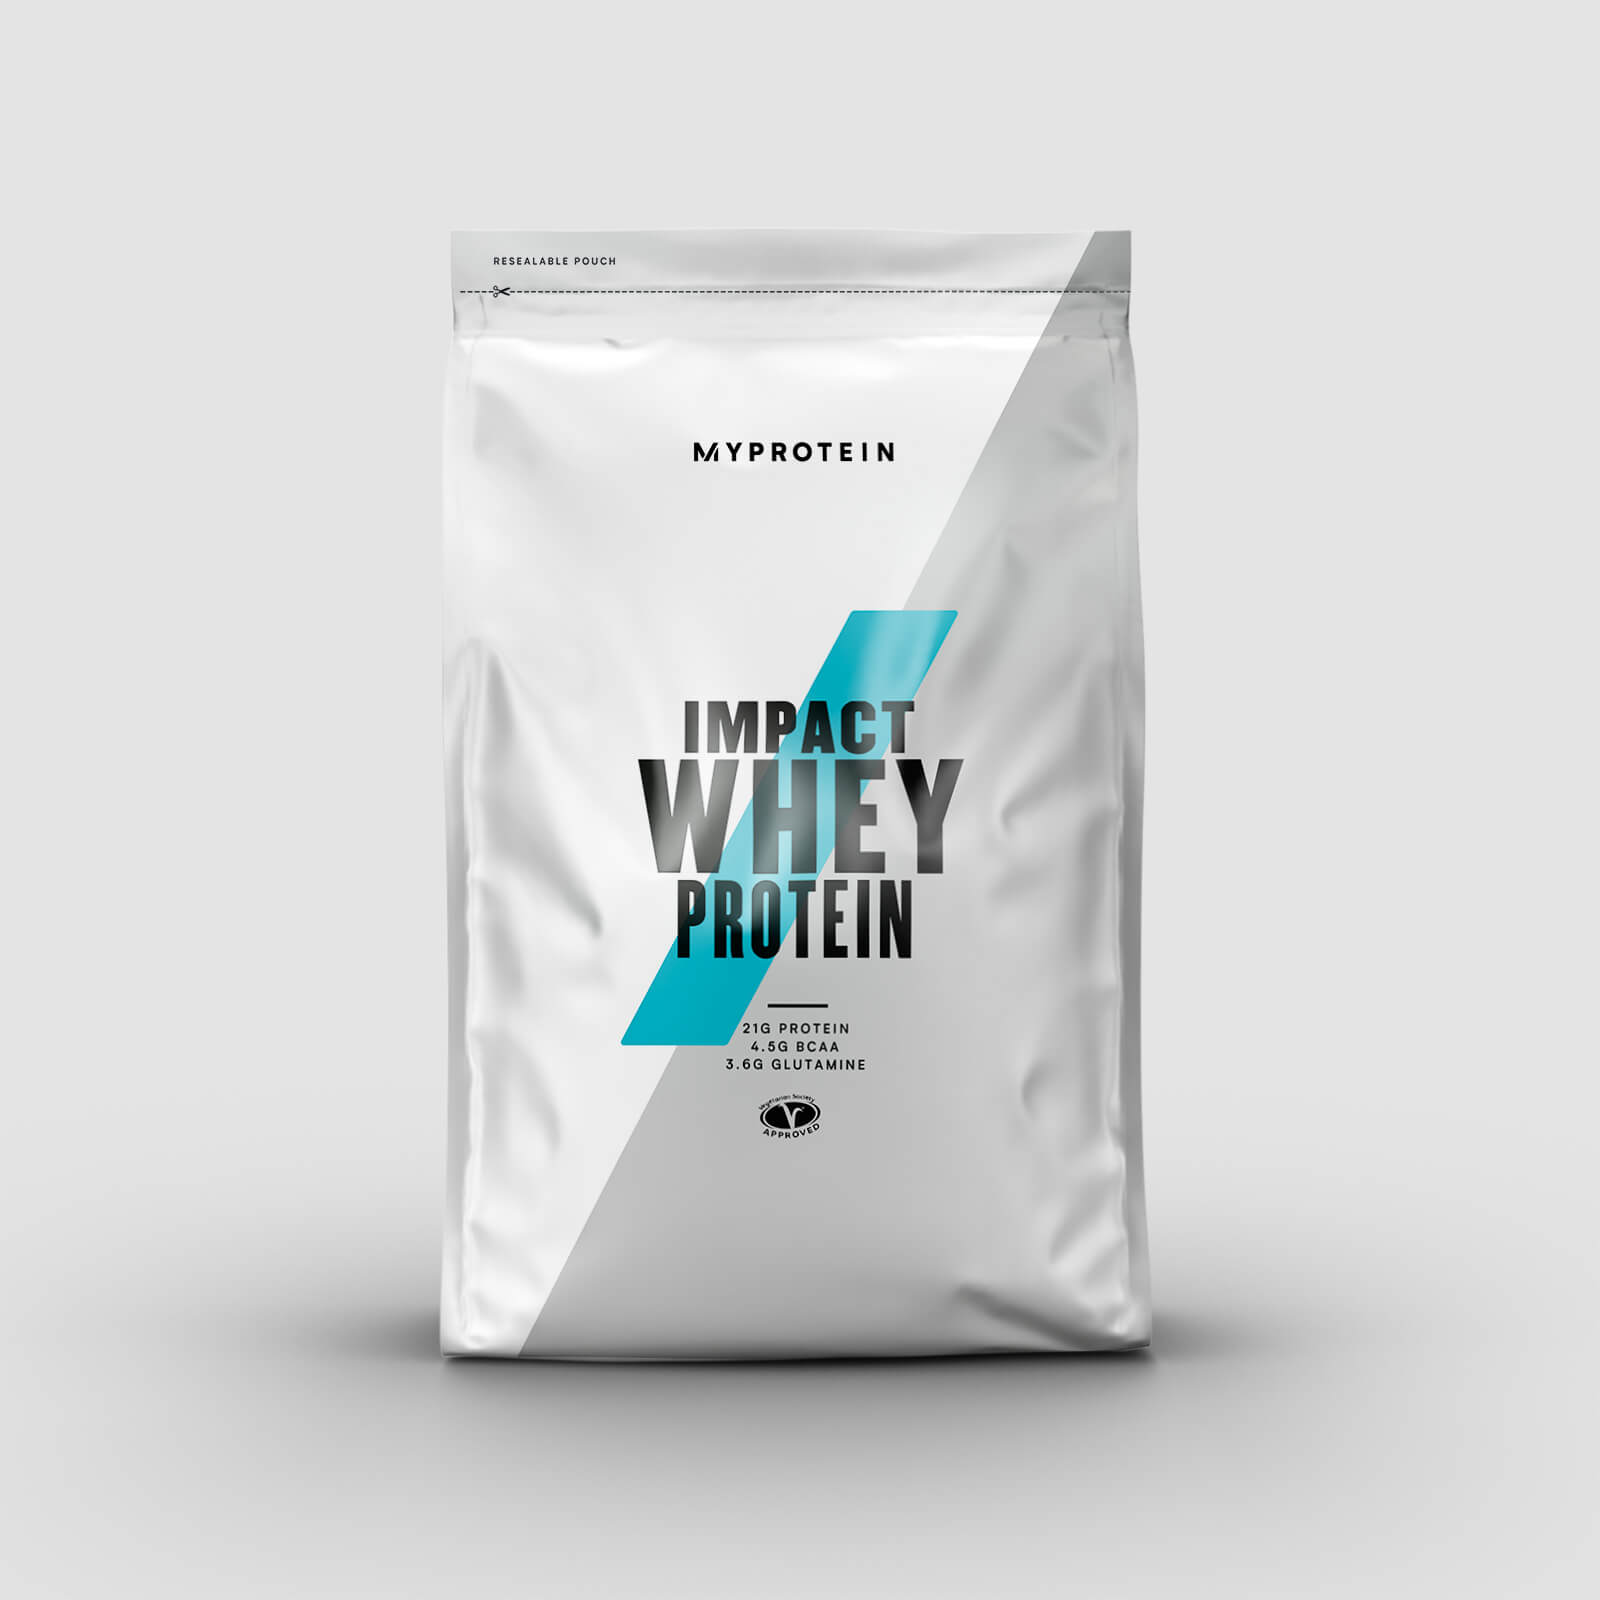 Myprotein Impact Whey Protein - 5kg - Raspberry - New and Improved